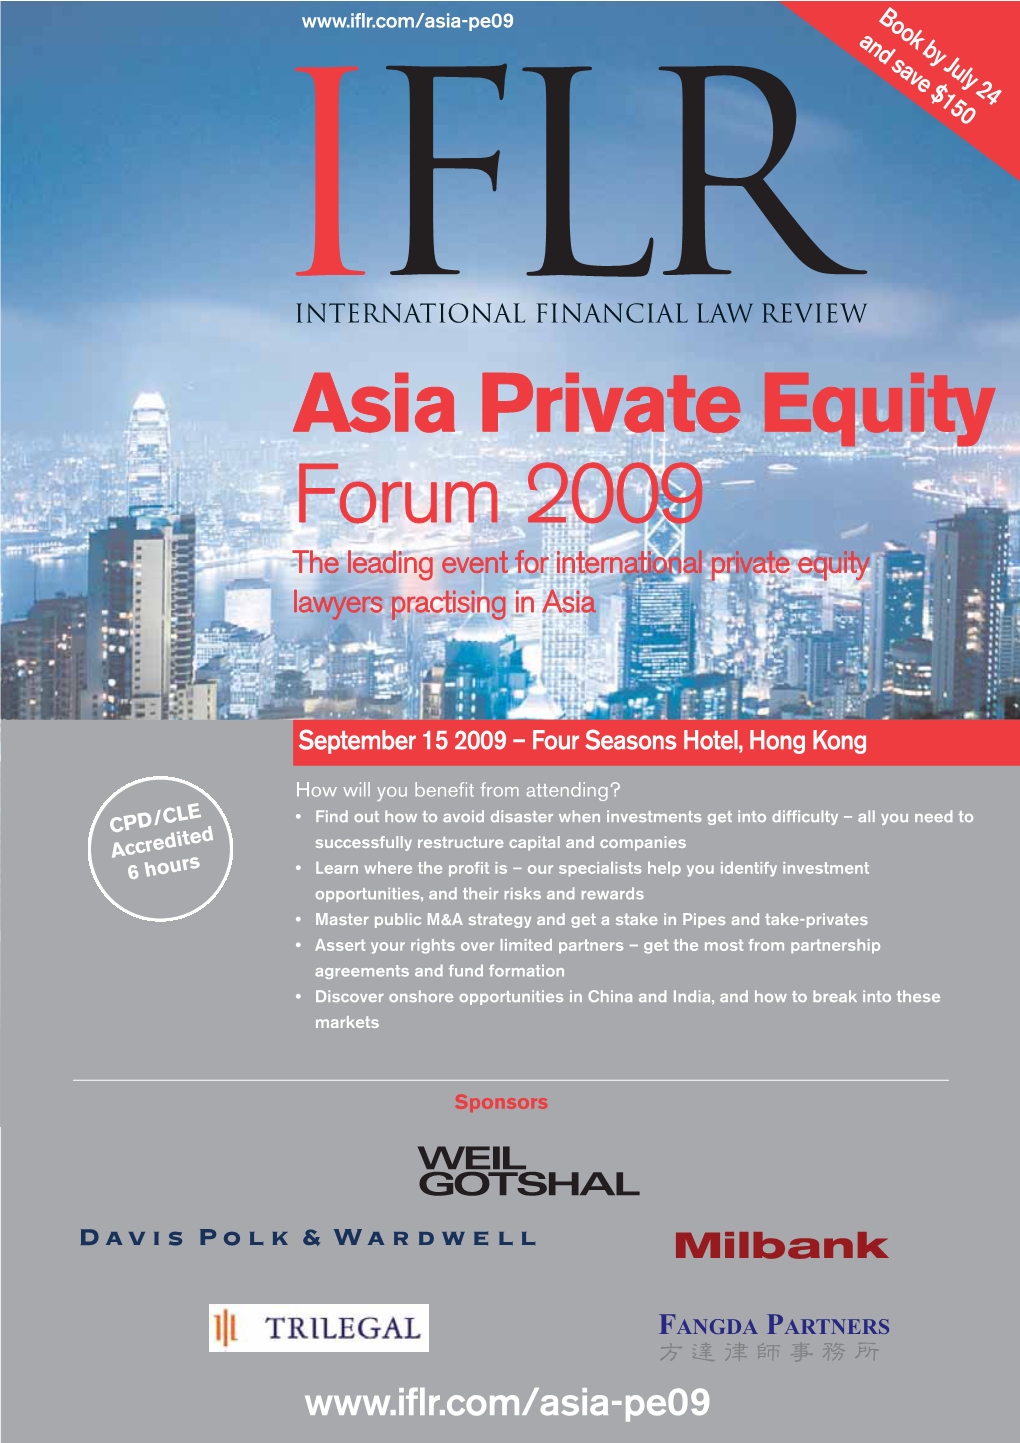 Asia Private Equity Forum 2009 the Leading Event for International Private Equity Lawyers Practising in Asia